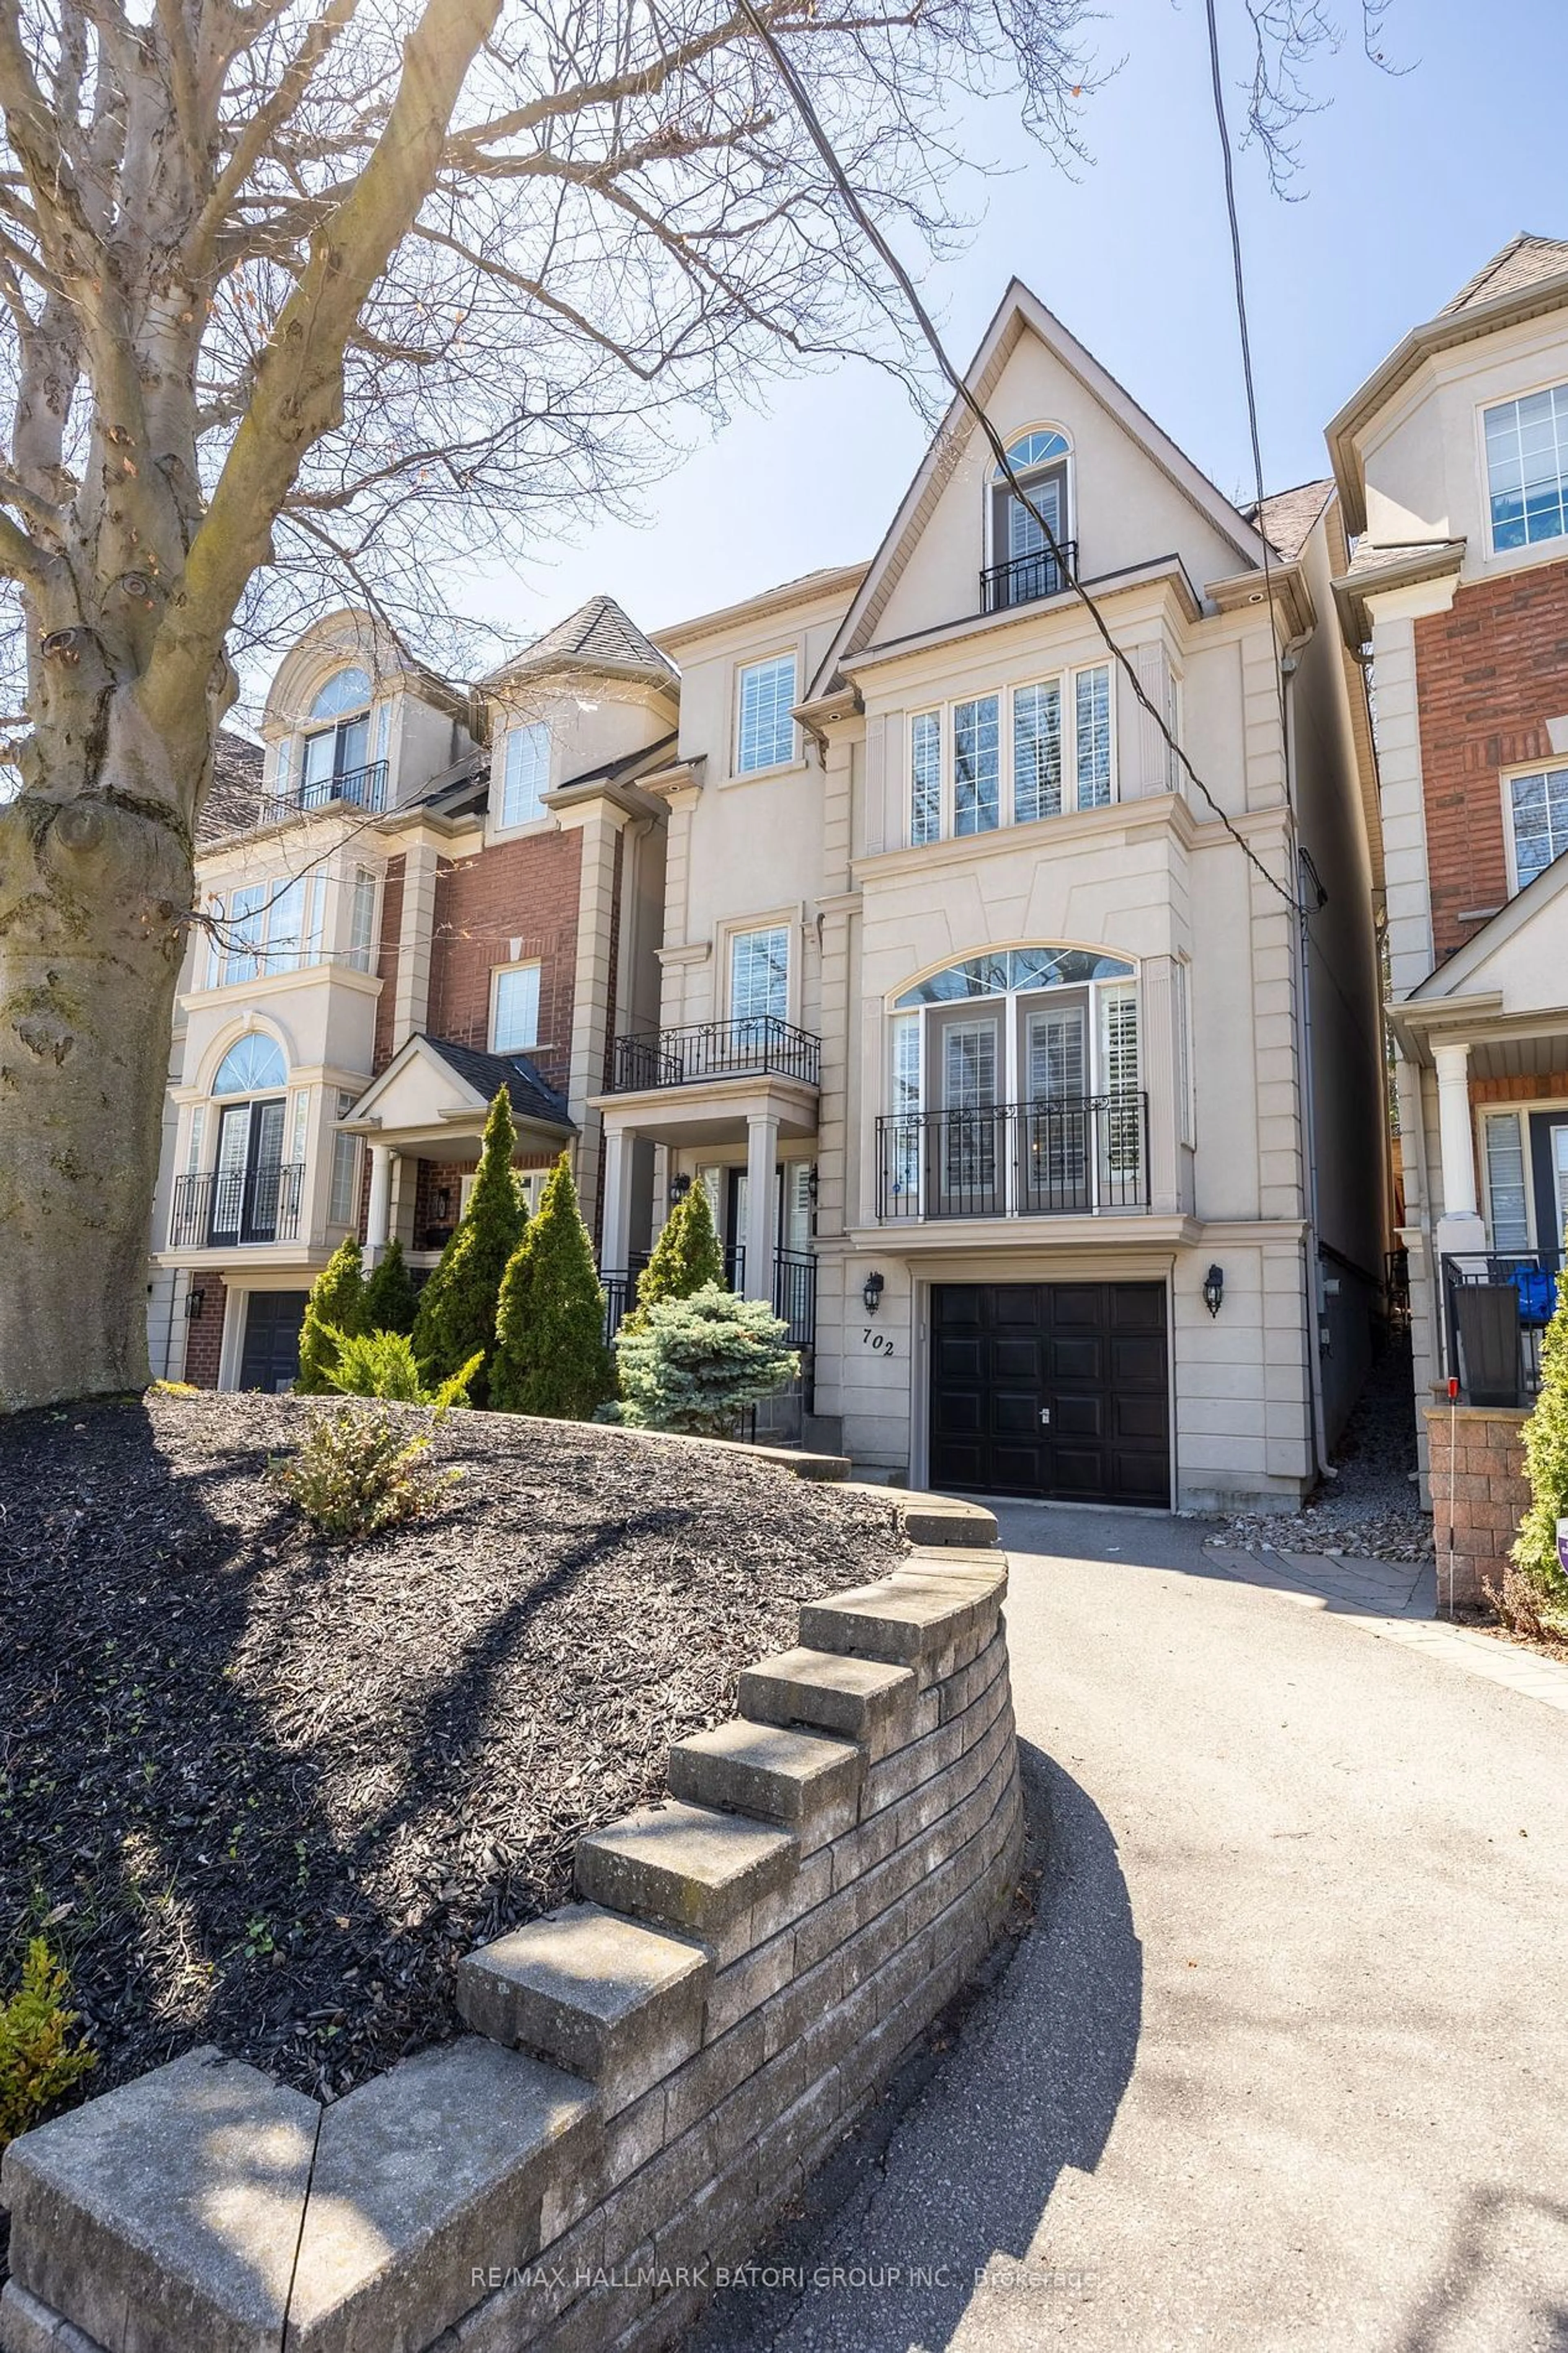 Home with brick exterior material for 702 Oriole Pkwy, Toronto Ontario M4R 2C5